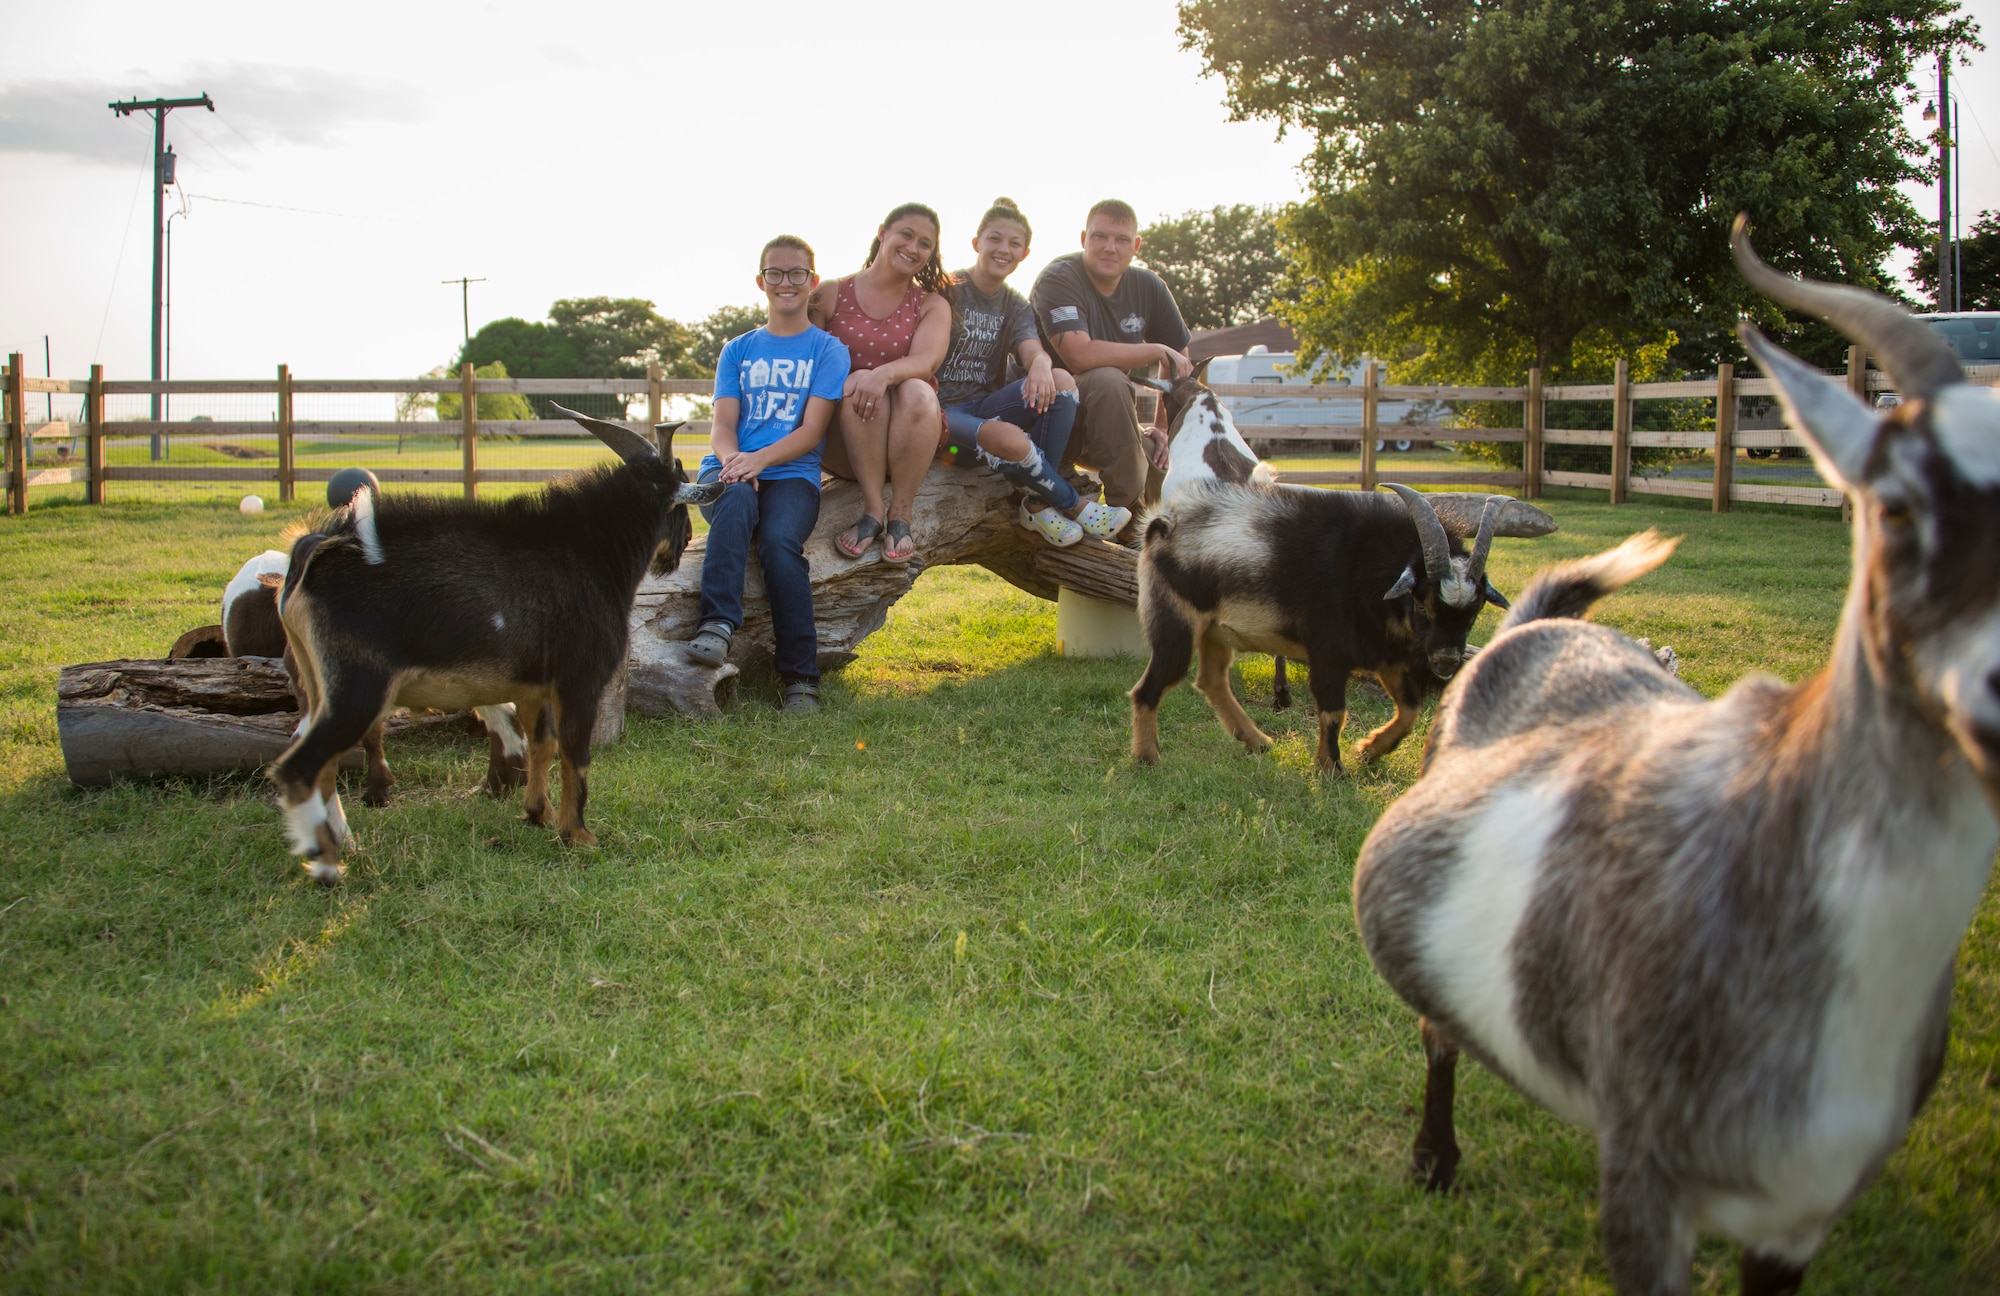 The Kessler family poses for a photo with their goats on 1AB Ranch in Altus, Oklahoma, Aug. 5, 2021. The family moved to their ranch in October of 2020 and have since amassed a number of goats, pigs, ducks, roosters and more. (U.S. Air Force photo by Senior Airman Amanda Lovelace)